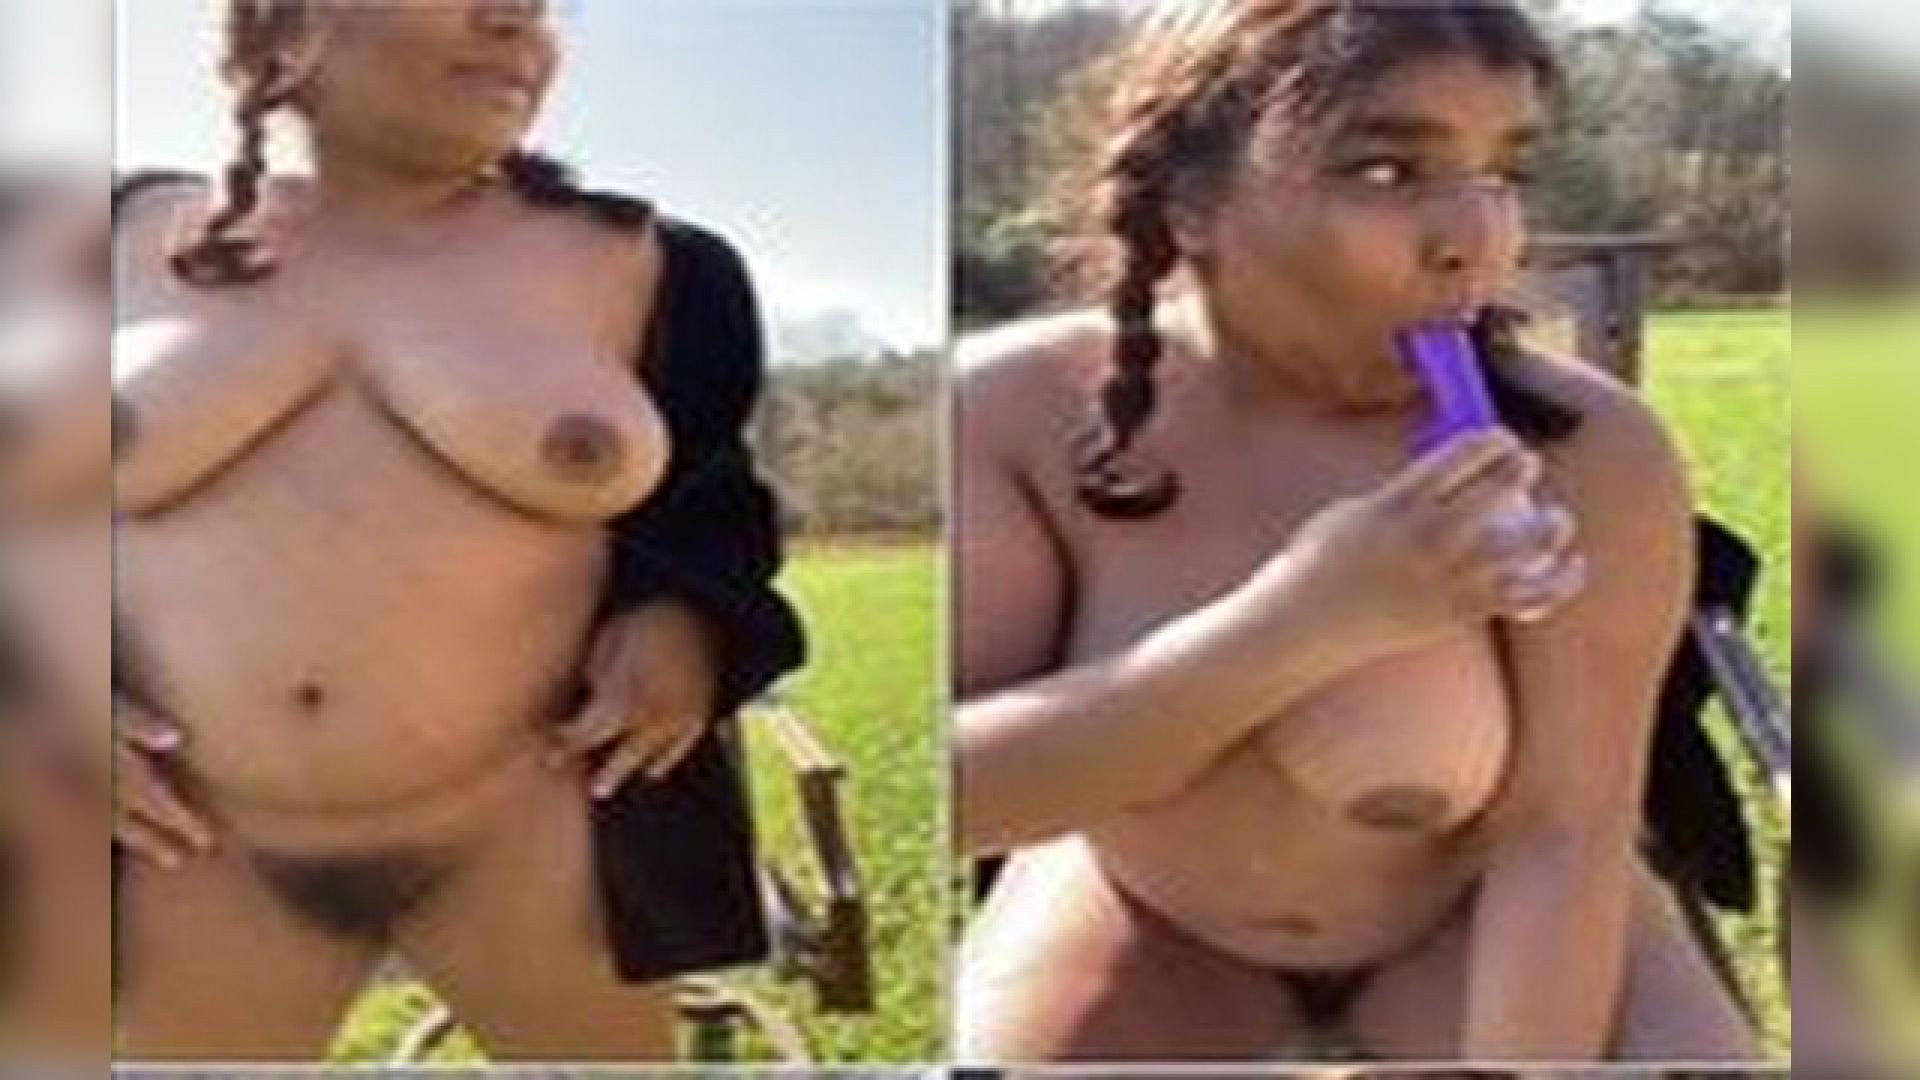 BBW HAIRY BABE OUTDOOR FUCKING HER WITH A DILDO